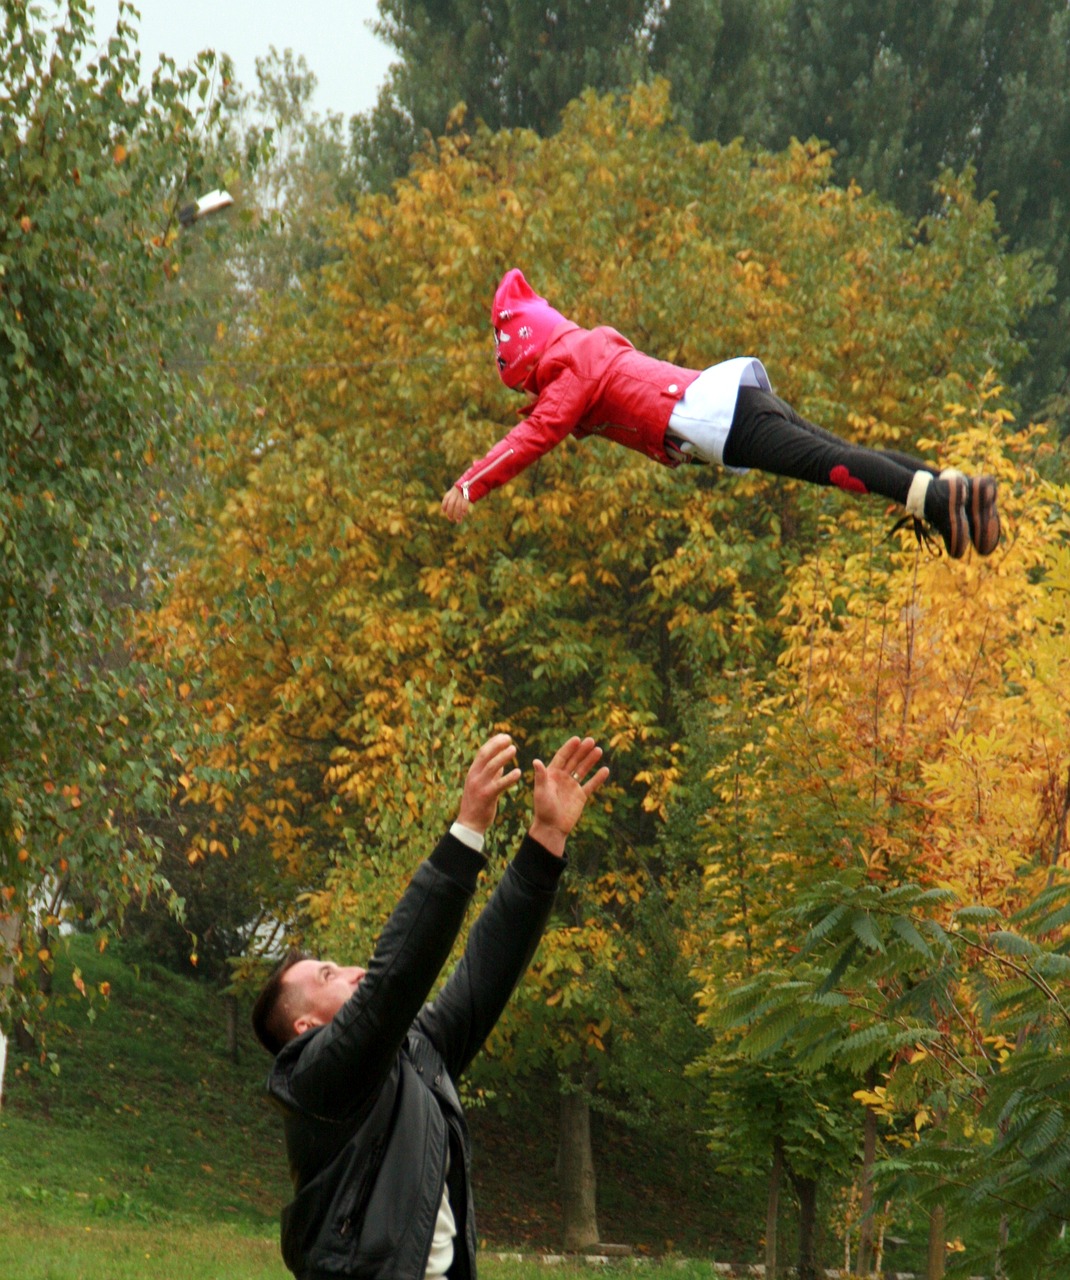 dad throwing their child in the air